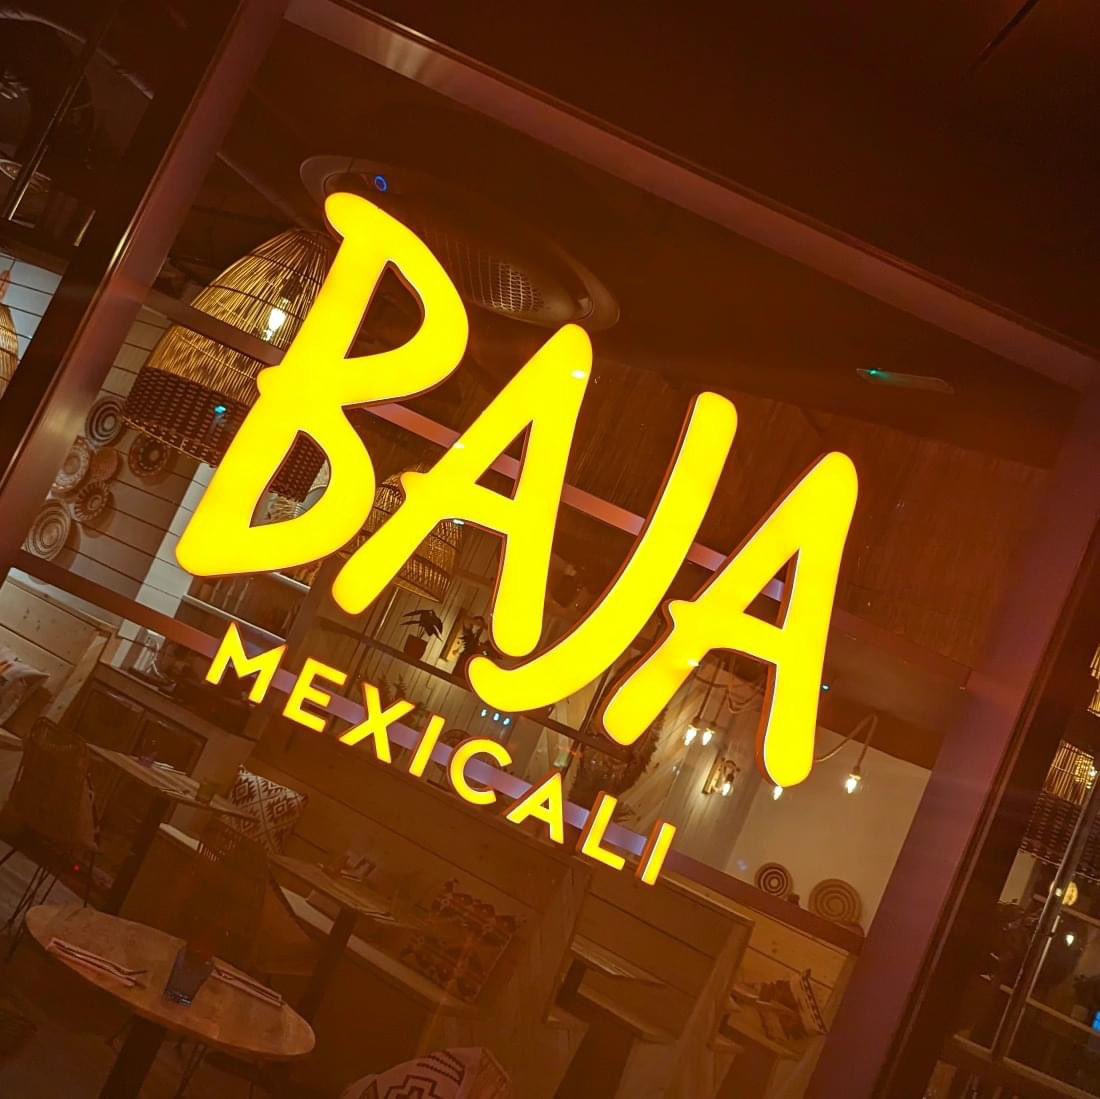 Find out why I keep going back to this cool Californian style Mexican in the city. southseafolk.uk/baja-mexicali/ #portsmouth #mexicanfood #portsmouthfood #independentbusiness #southseafolk